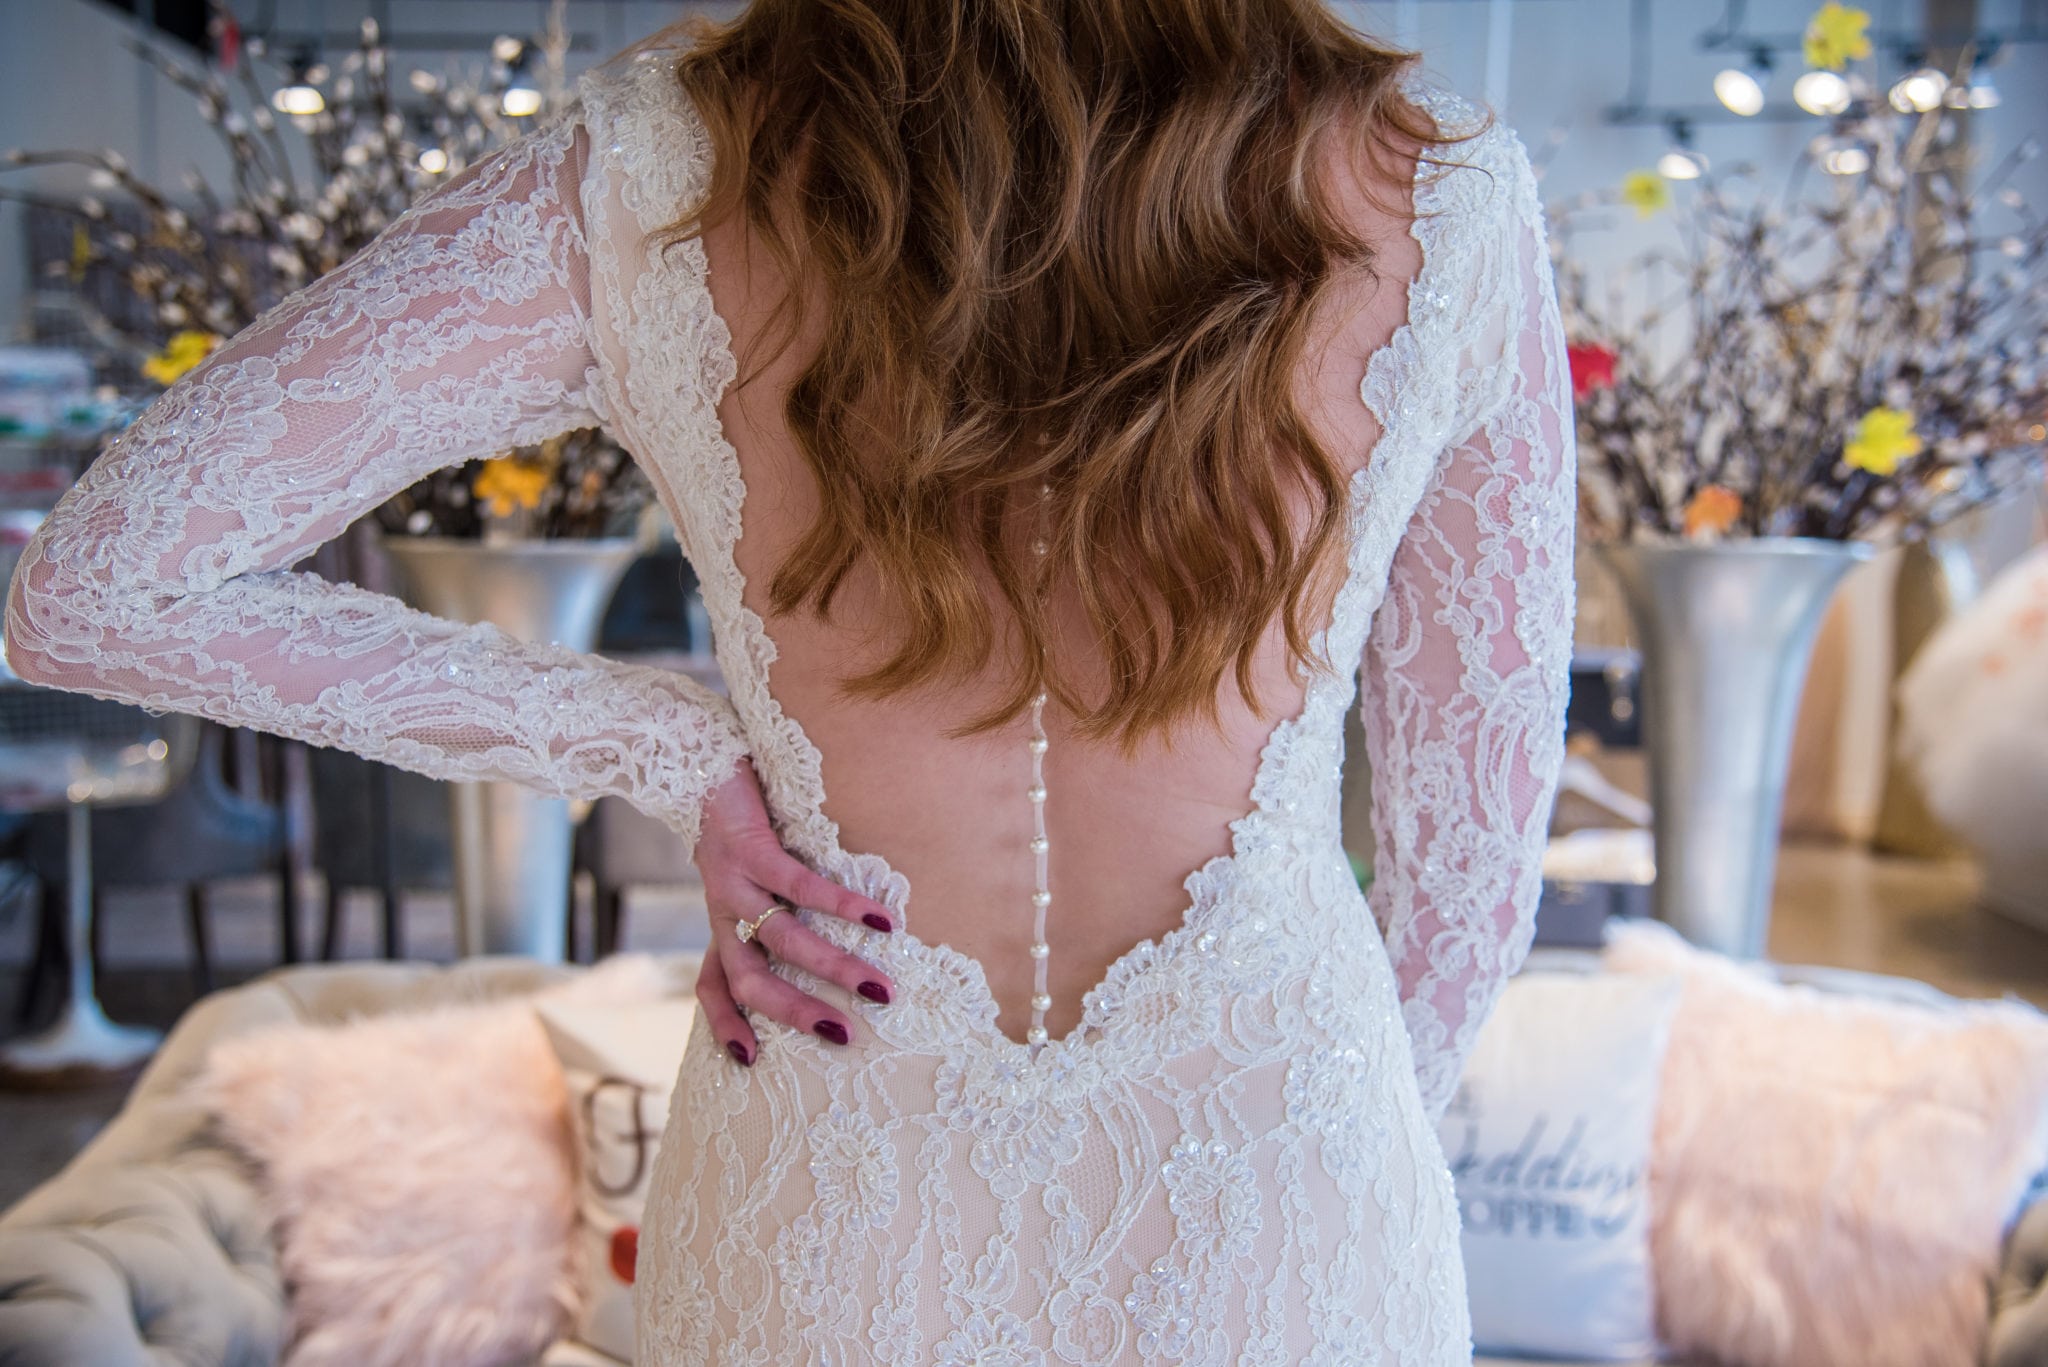 Pearls are a classic and romantic embellishment on wedding dresses this fall.